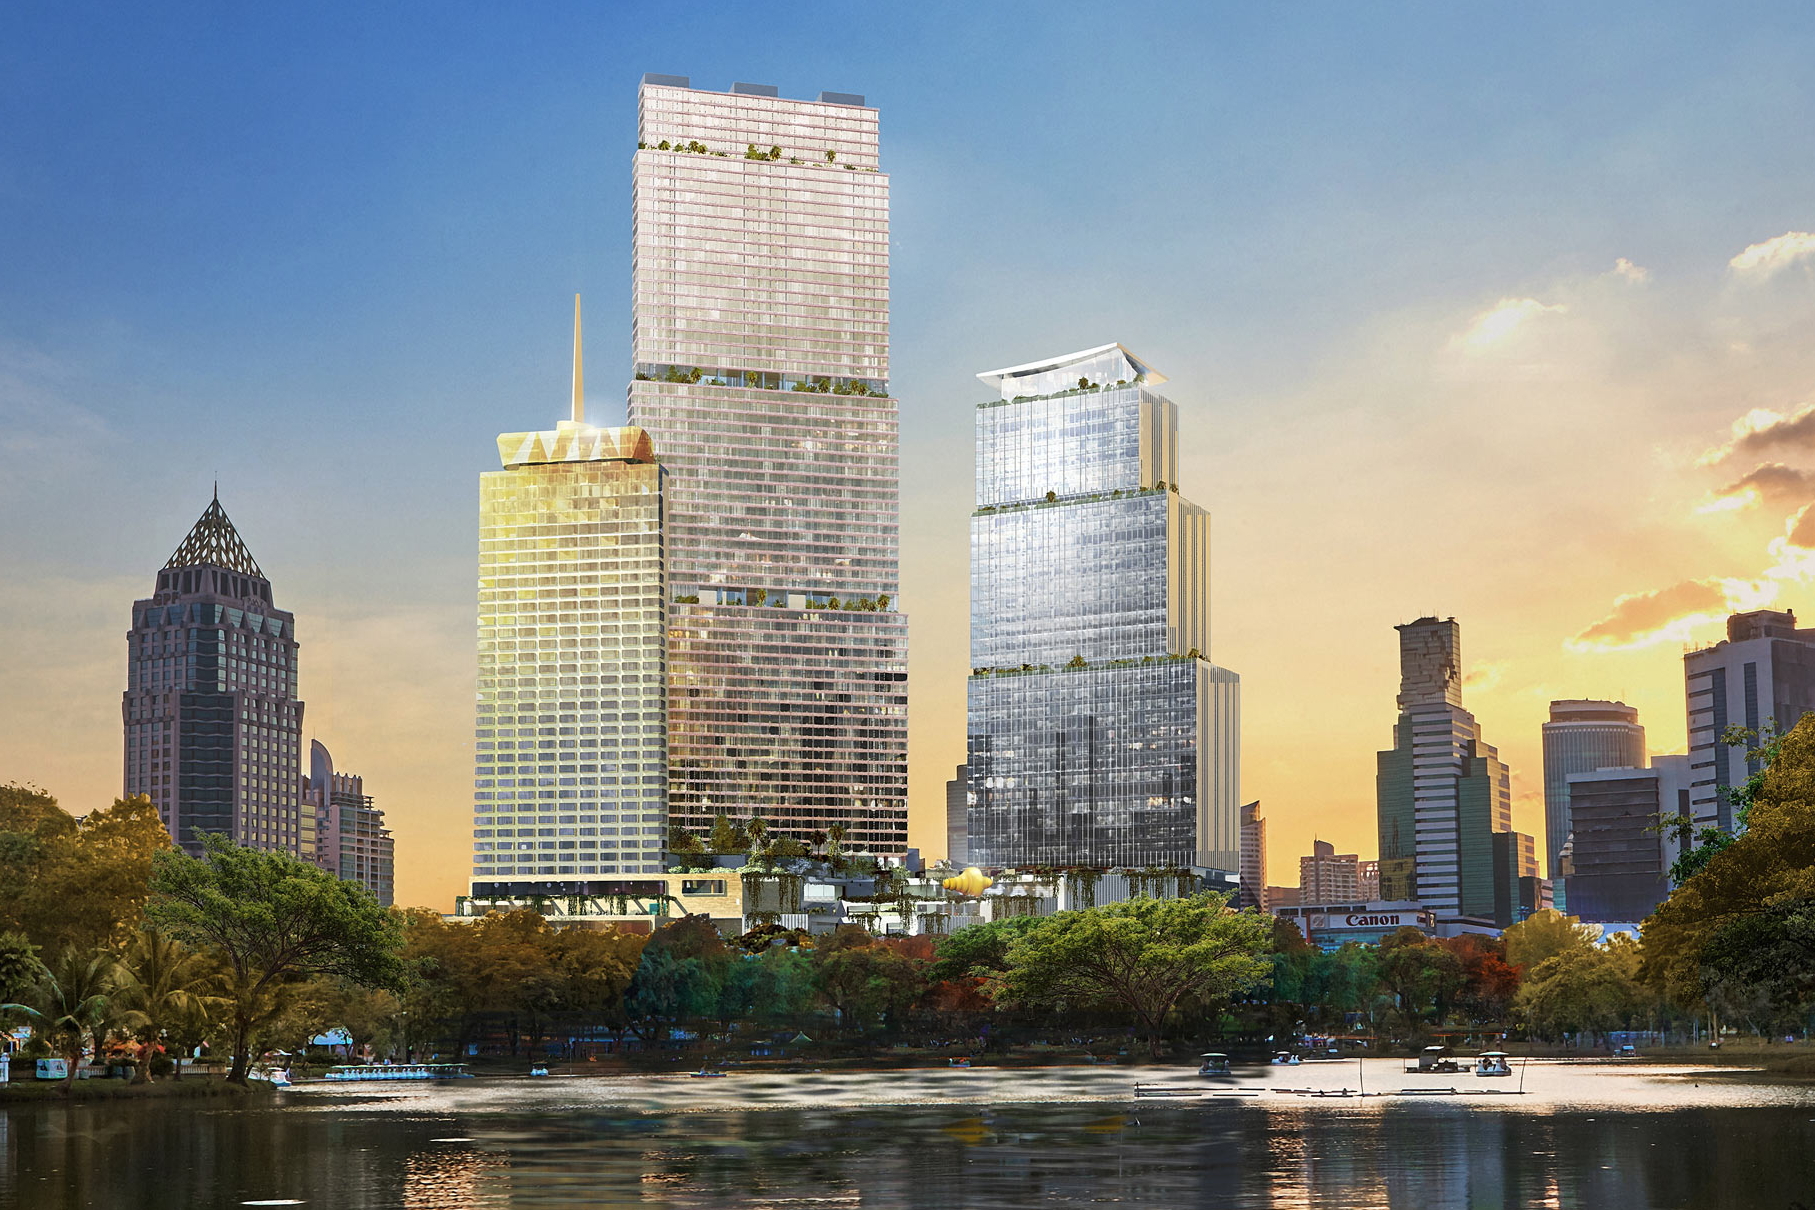 Worth a total of 36.7 billion baht and covering 440,000 sqm of prime real estate on the corner of Silom and Rama IV roads, the project will feature luxury residences, an office tower, a high-end shopping complex with a large rooftop park, and a distinctive reimagining of the Dusit Thani Bangkok hotel, Dusit's iconic flagship property, which served as a symbol of gracious Thai hospitality for 50 years. Click to enlarge.